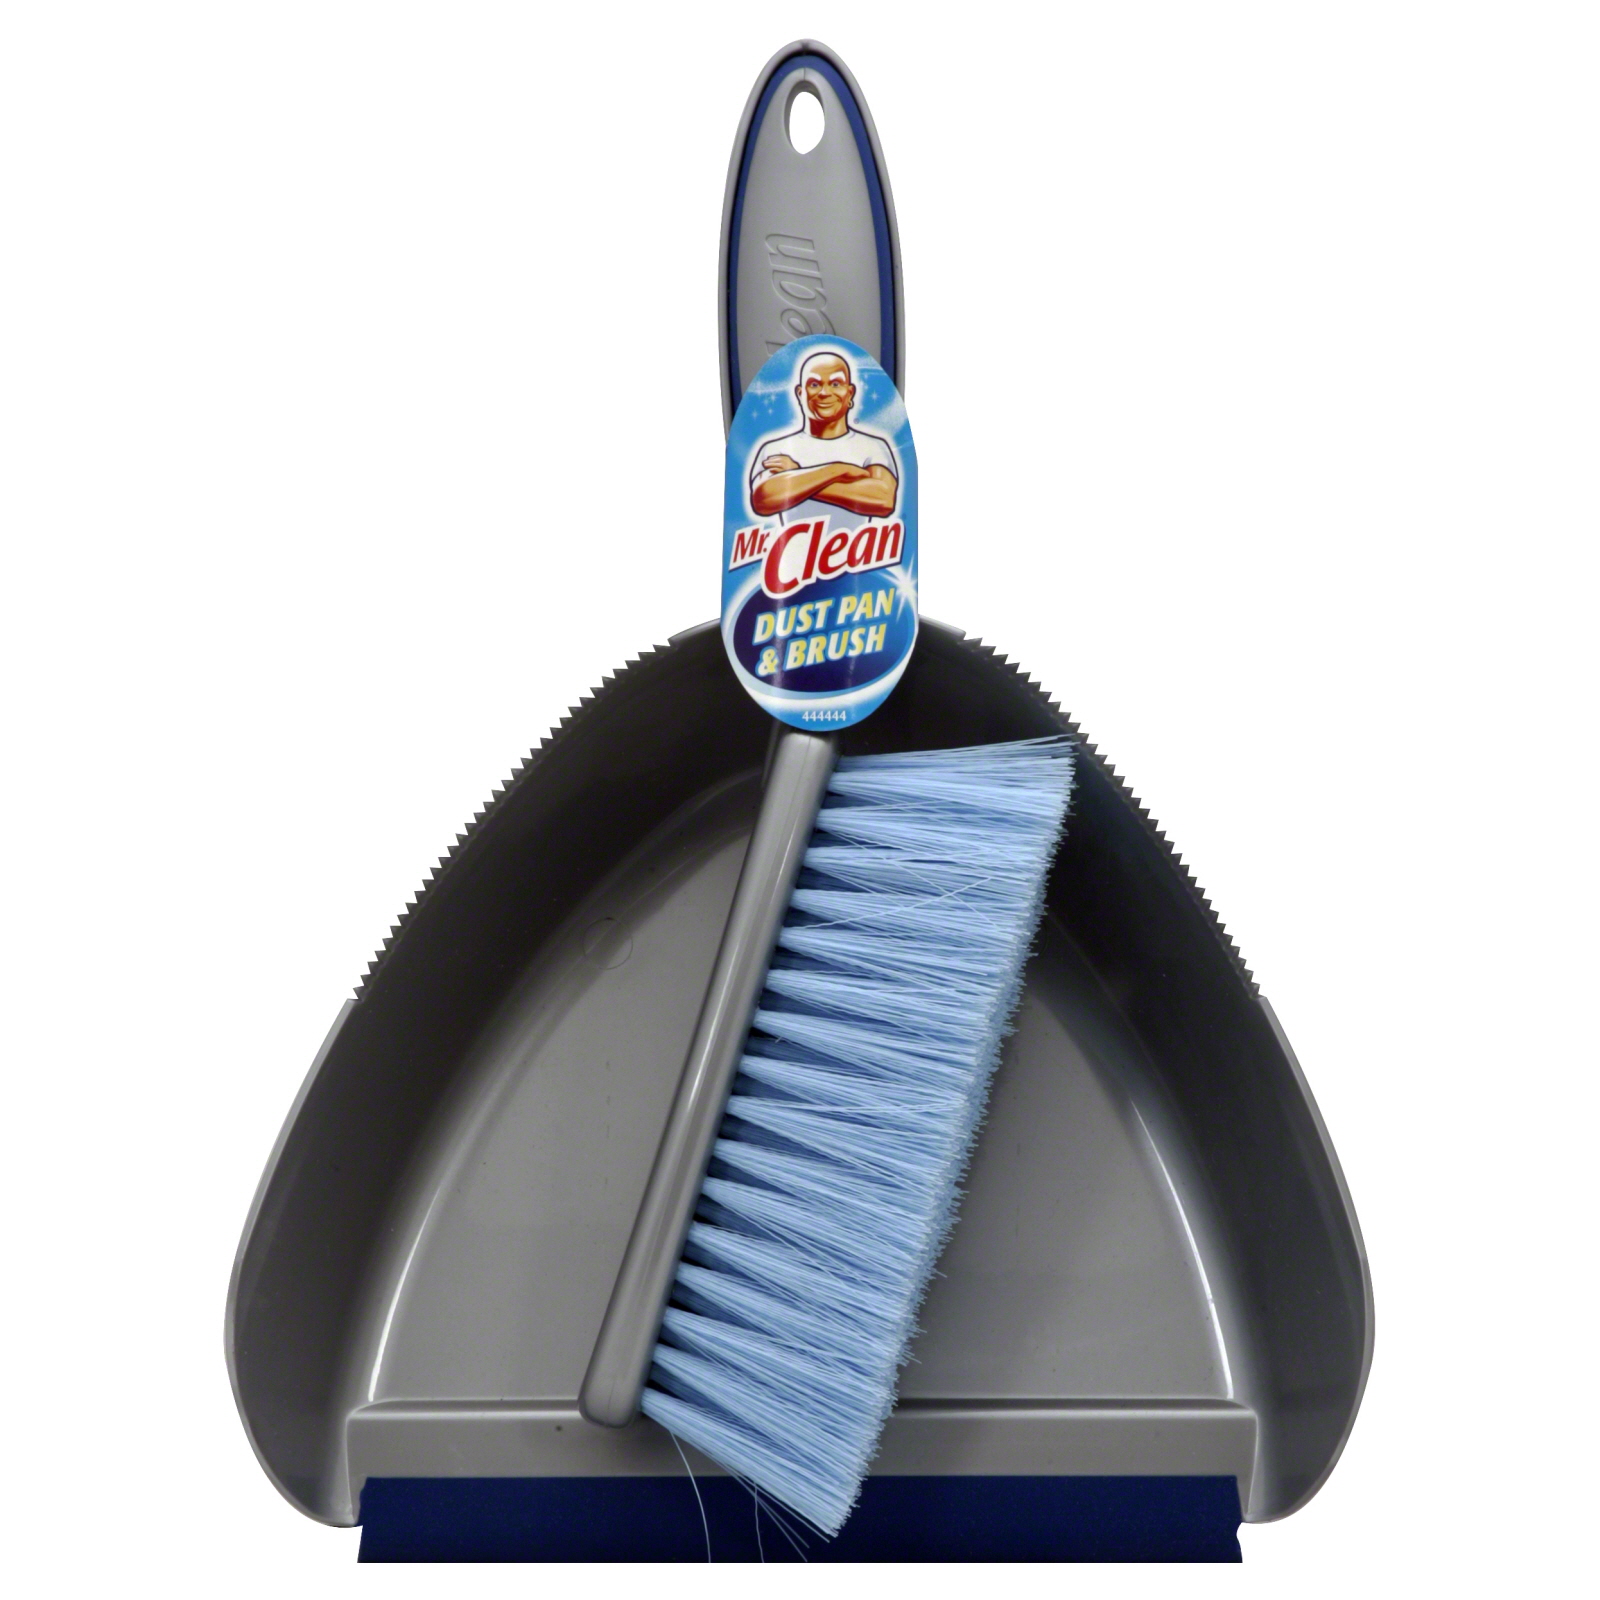 Mr. Clean 444444 Dust Pan and Brush Set